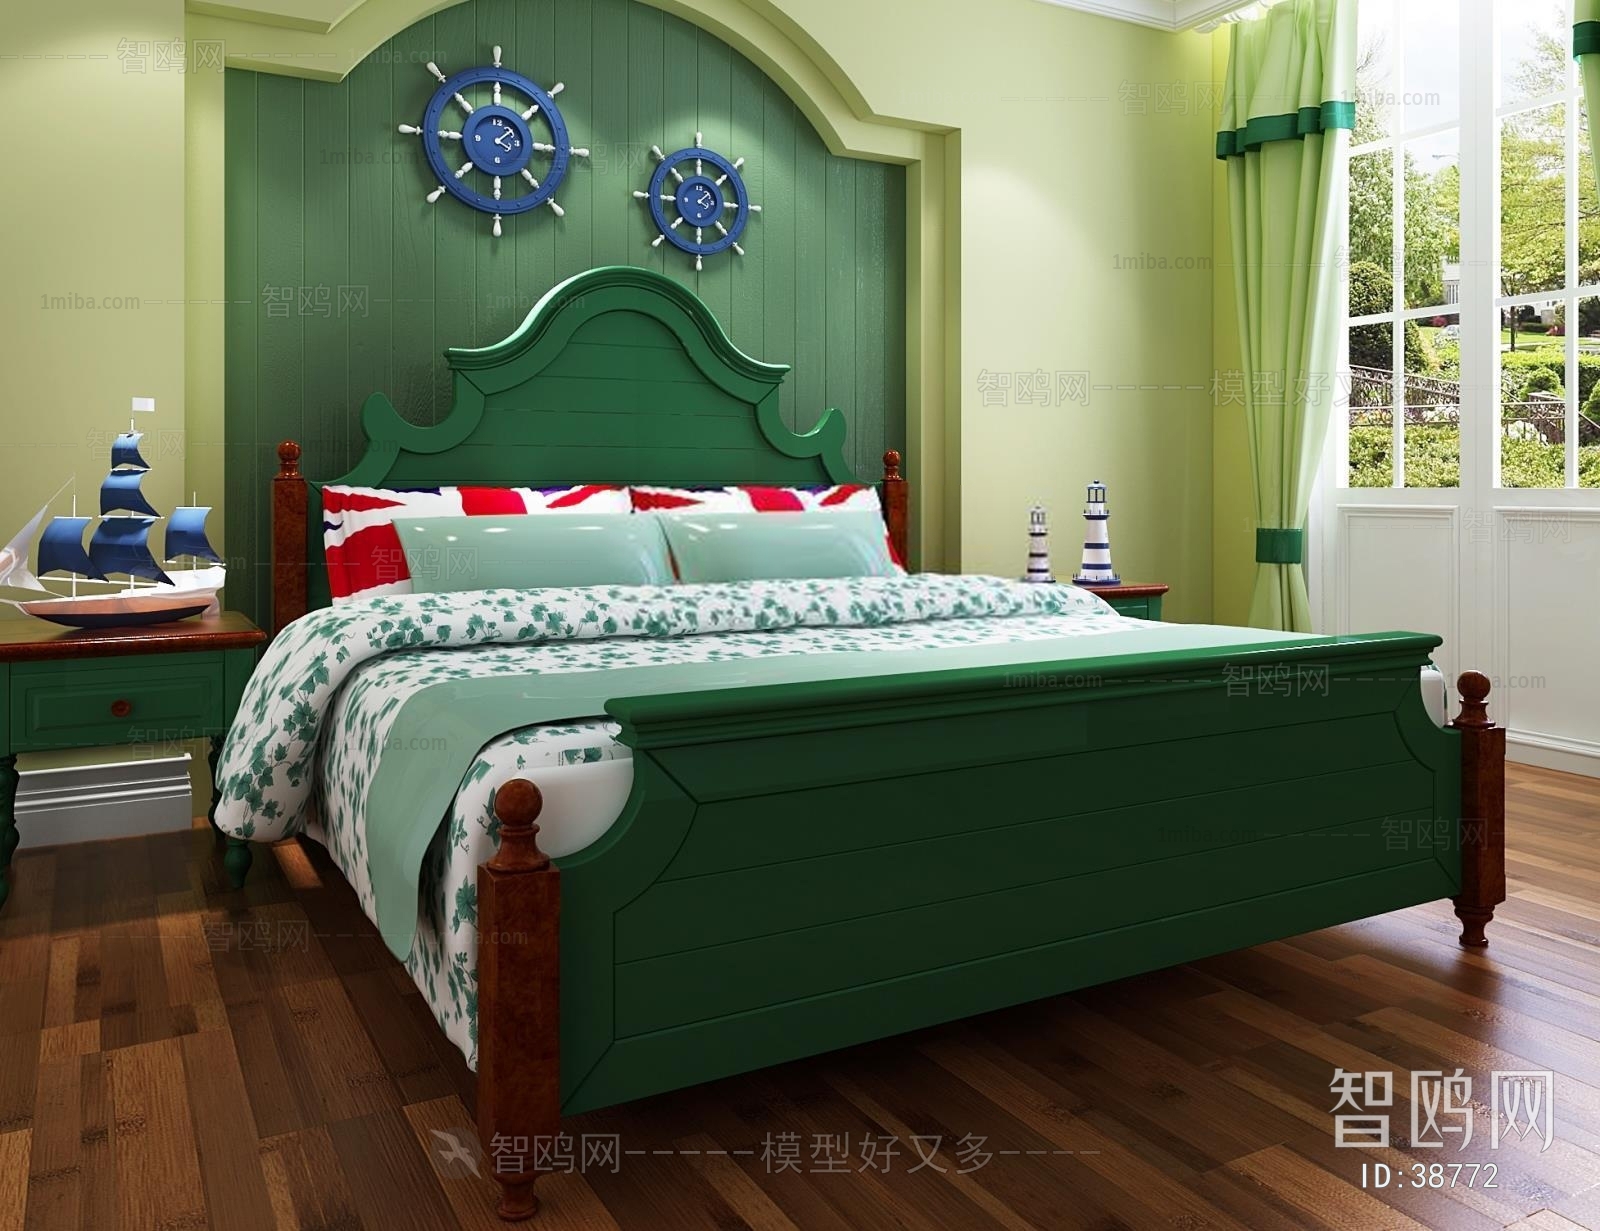 Mediterranean Style Double Bed